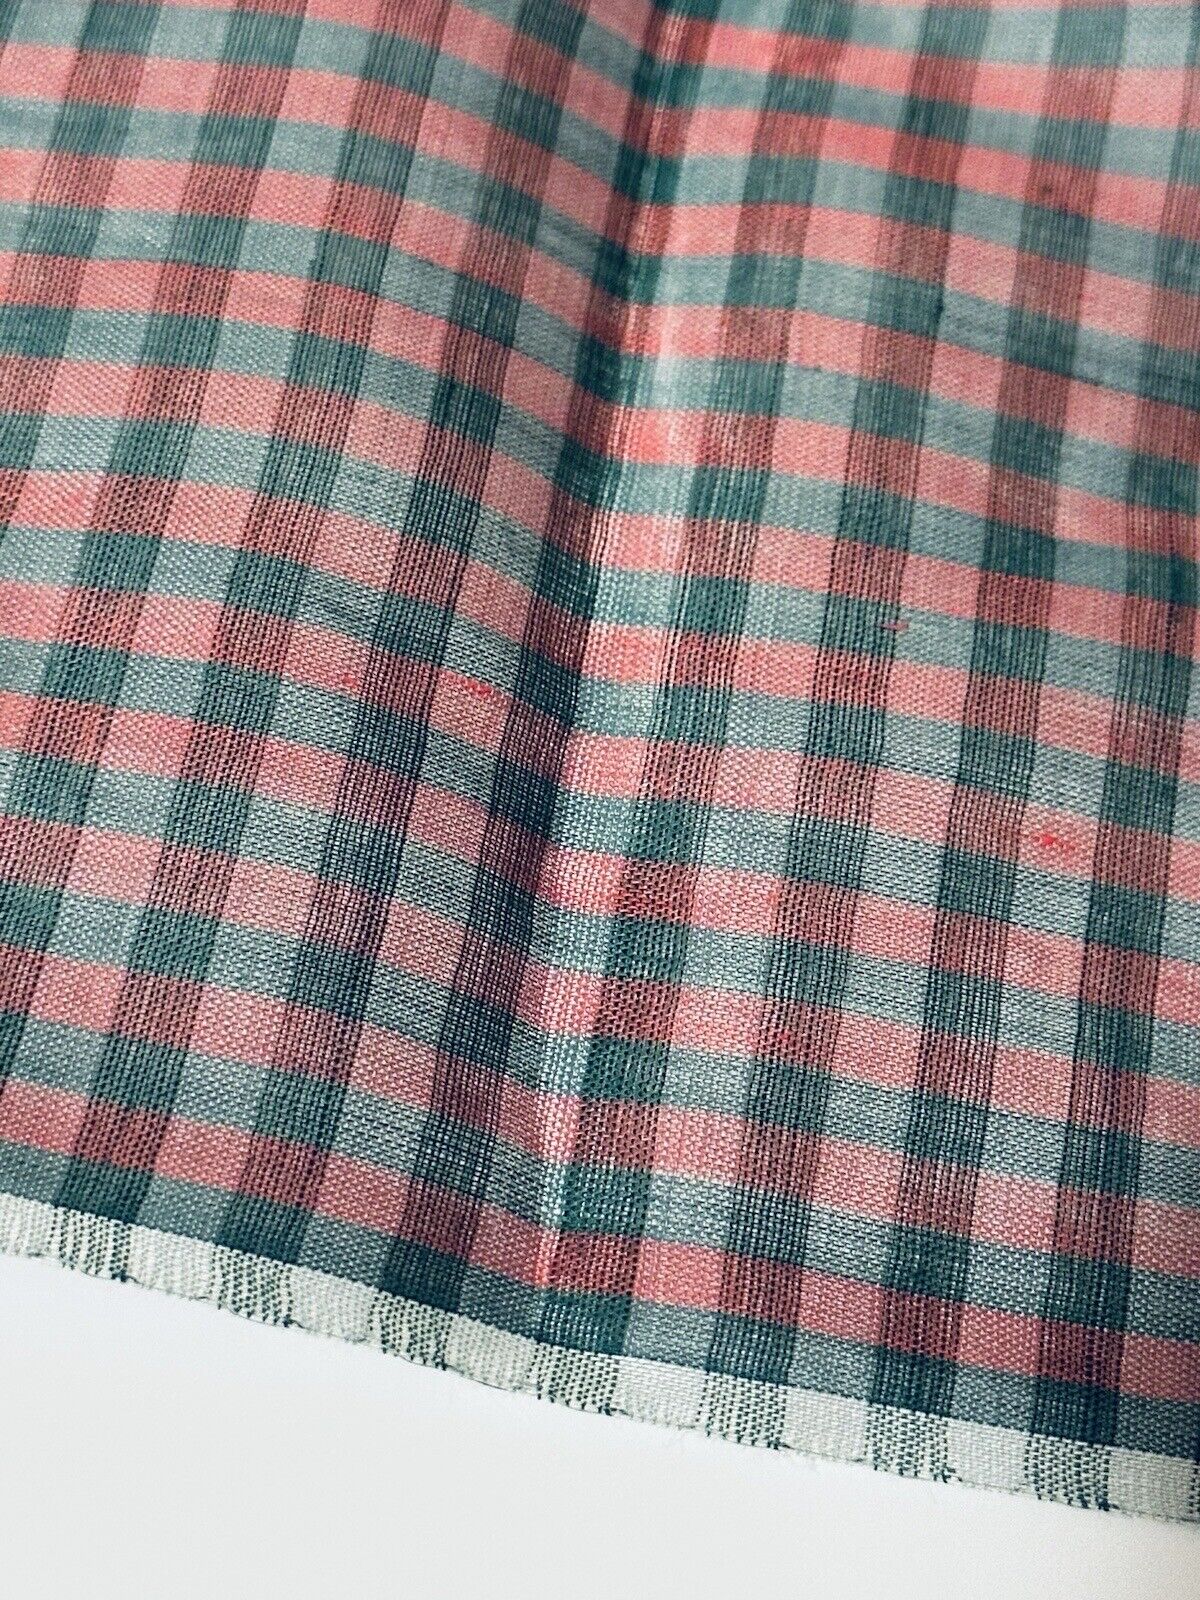 ANTIQUE VINTAGE COTTON VOILE PLAID Red Green Gingham Semi-sheer 4 1/4yd